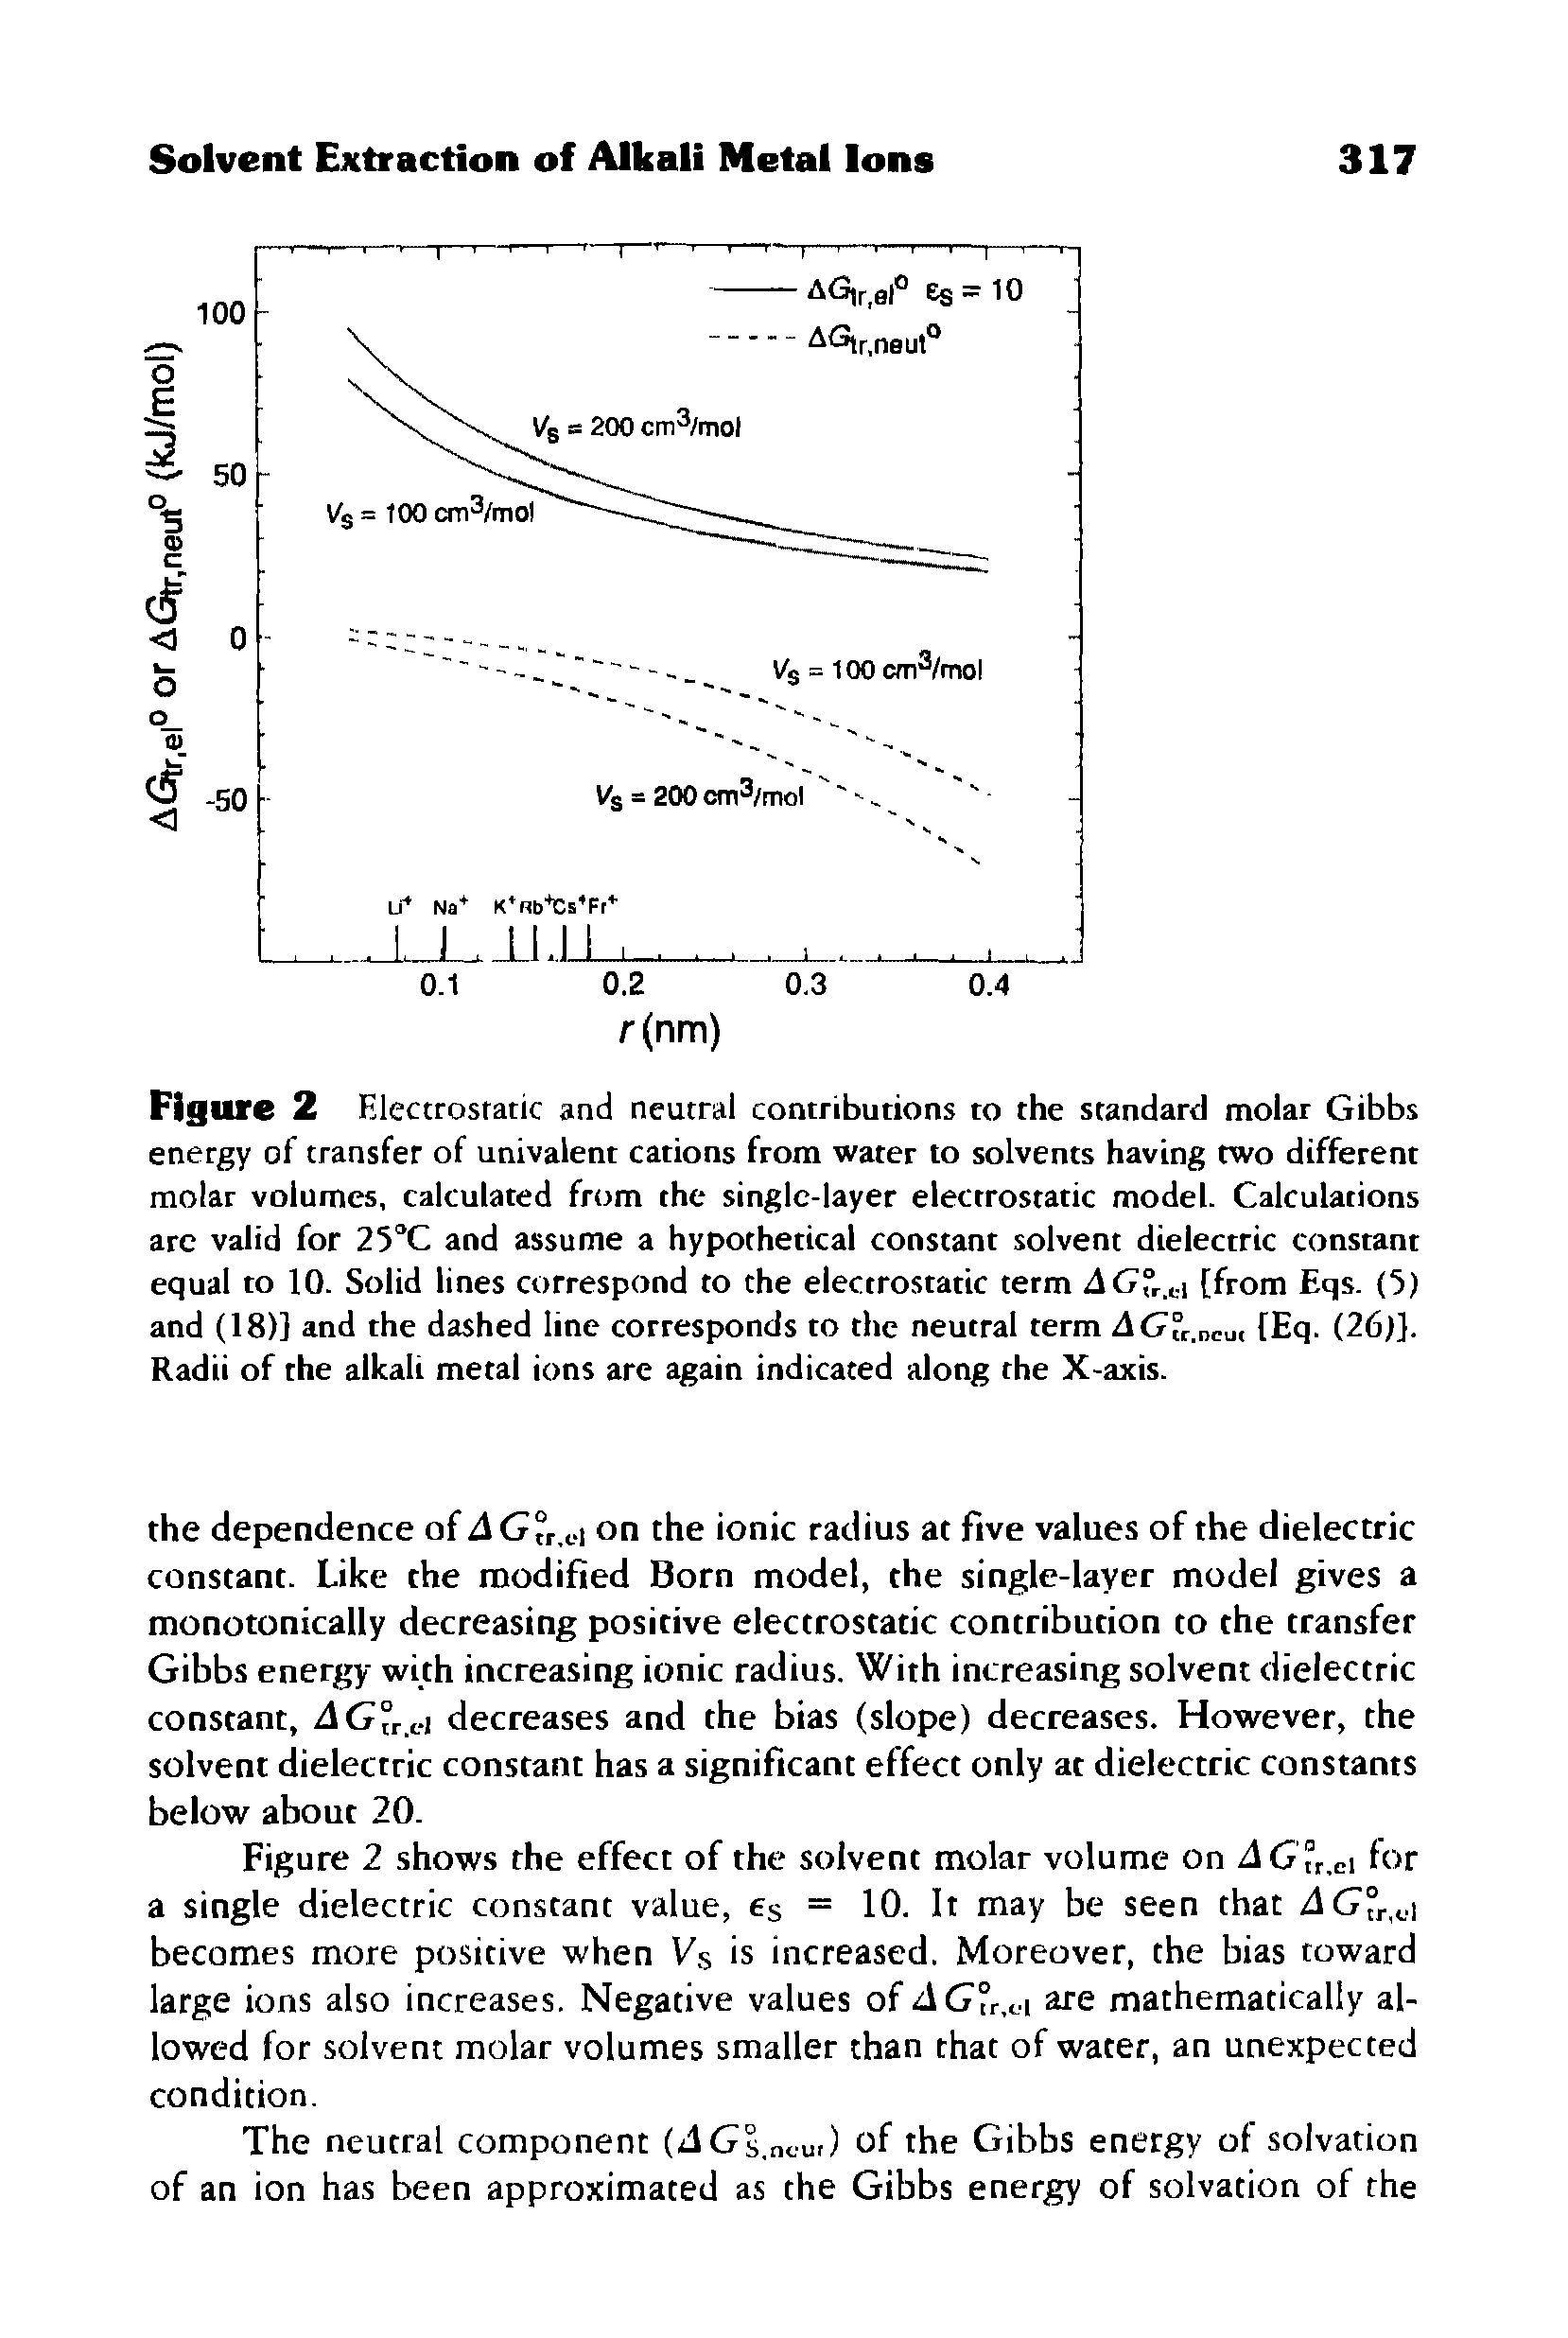 Figure 2 Electrostatic and neutral contributions to the standard molar Gibbs energy of transfer of univalent cations from water to solvents having two different molar volumes, calculated from the single-layer electrostatic model. Calculations are valid for 25 C and assume a hypothetical constant solvent dielectric constant equal to 10. Solid lines correspond to the electrostatic term [from Eqs. (5)...